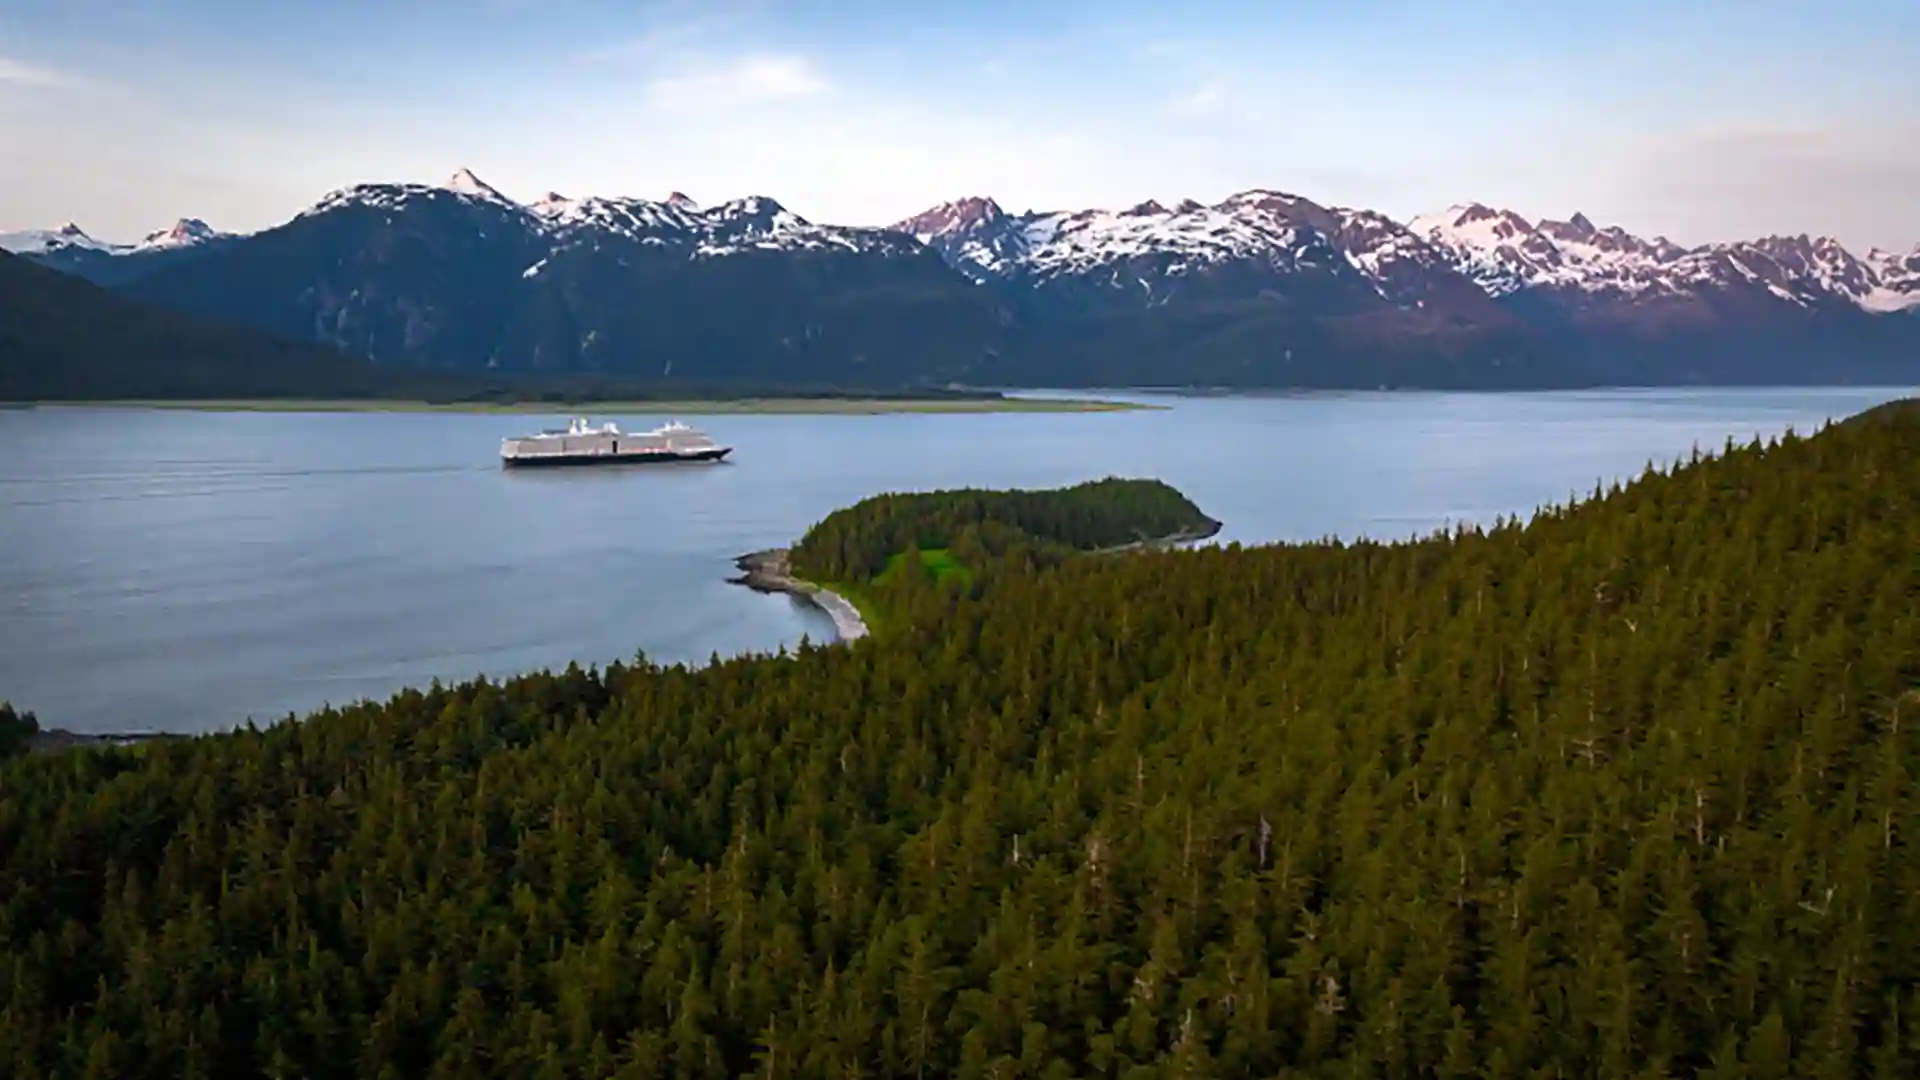 View of Holland America Line cruise ship sailing around Alaska near lush forests and snowcapped mountains.